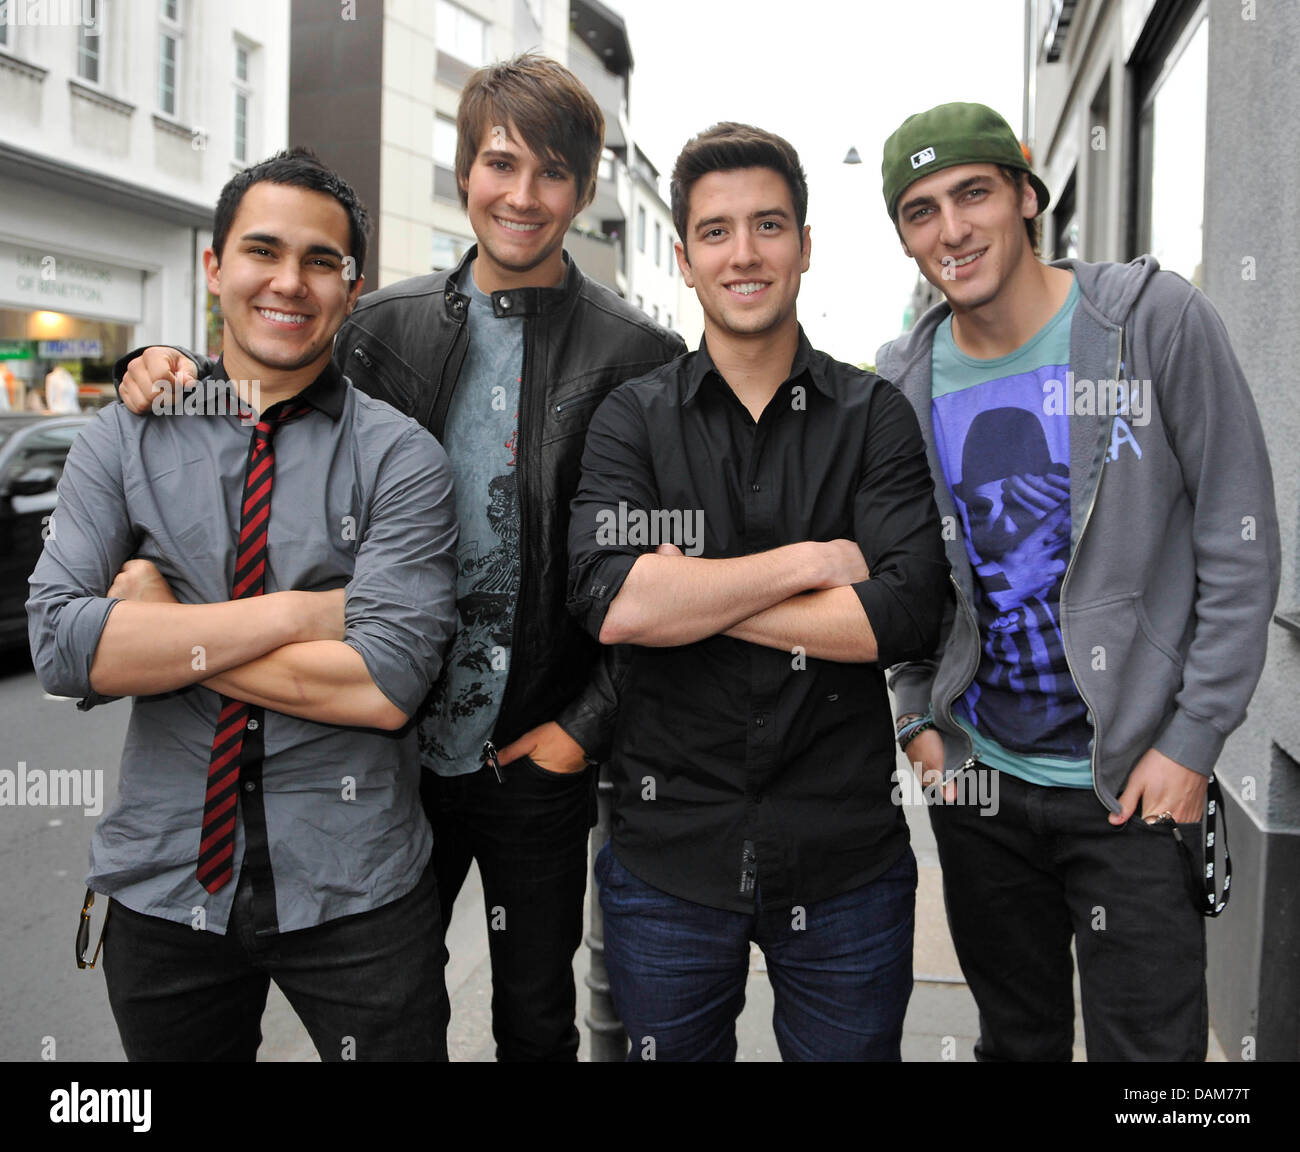 Carlos Pena Jr., James Maslow, Logan Henderson and Kendall Schmidt (l-r) of the band Big Time Rush pose in Cologne, Germany, 26 May 2011. Big Time Rush will perform during the ceremony for the Comet music prize in Oberhausen, Germany on 27 May 2011. Photo: HENNING KAISER Stock Photo